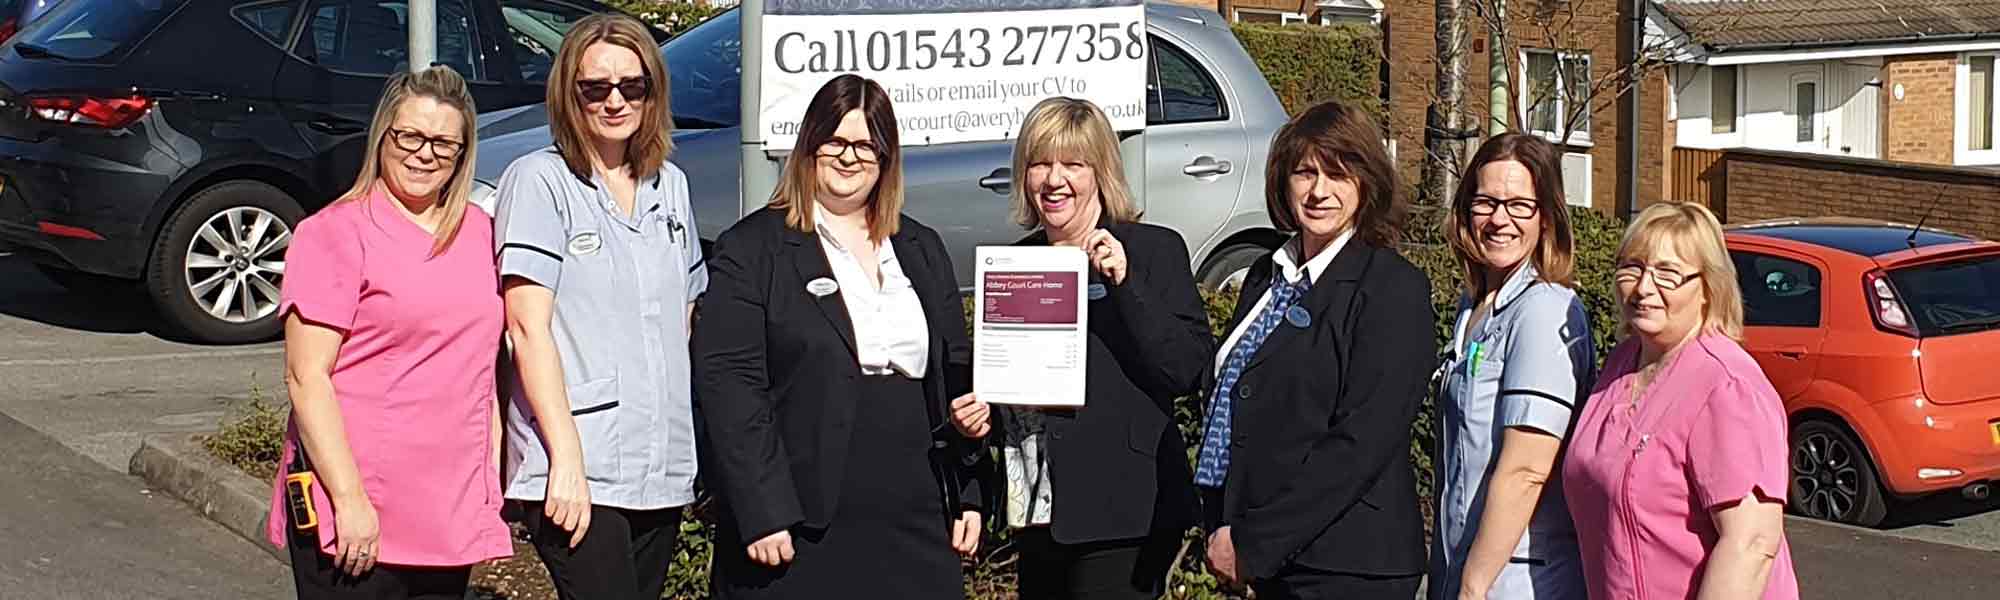 Abbey-Court-Care-Home-Cannock-CQC-Good-2019-banner-hero